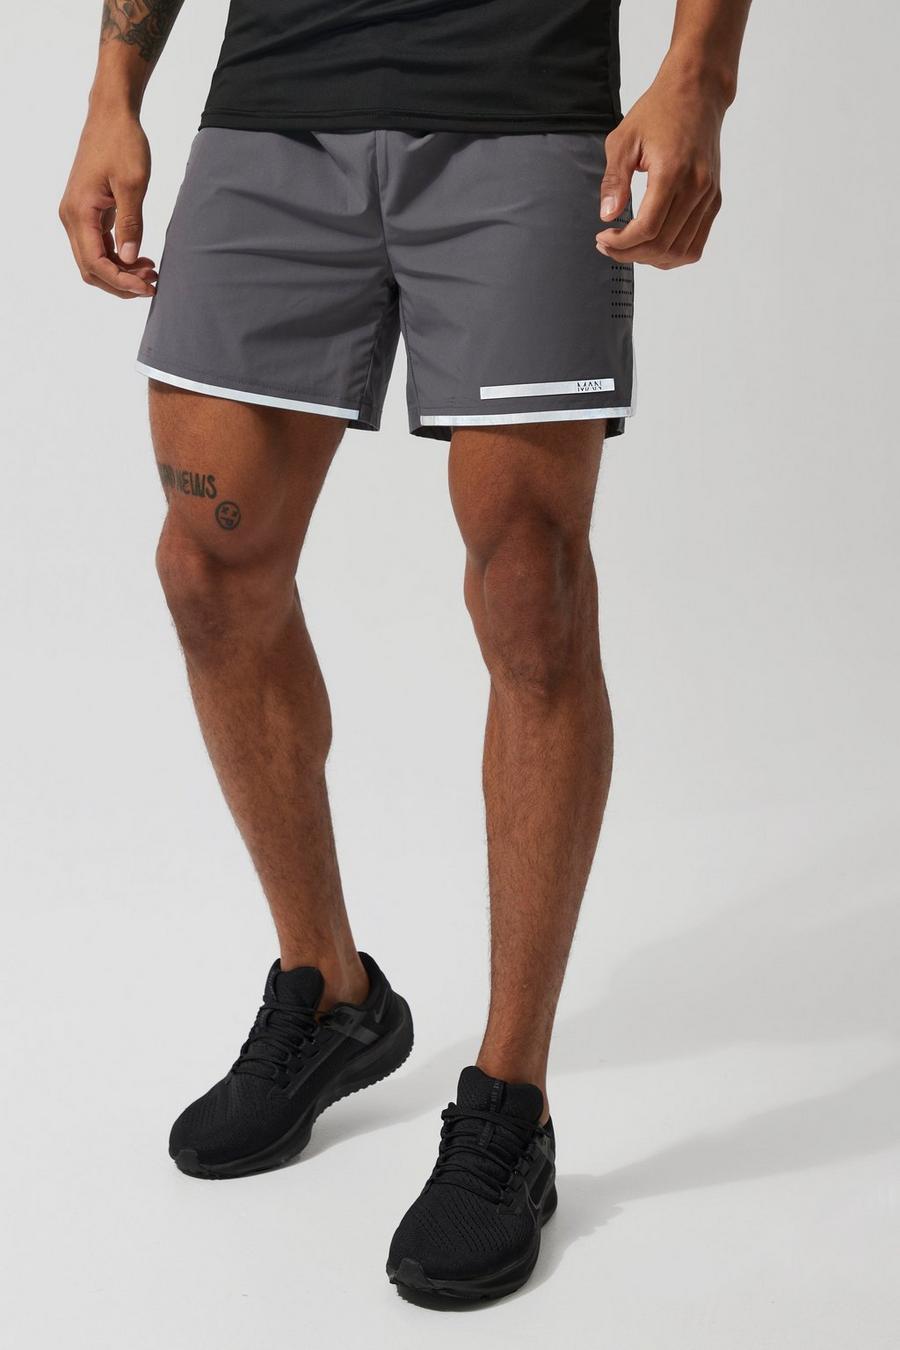 Charcoal gris Man Active 5 Inch Performance Shorts